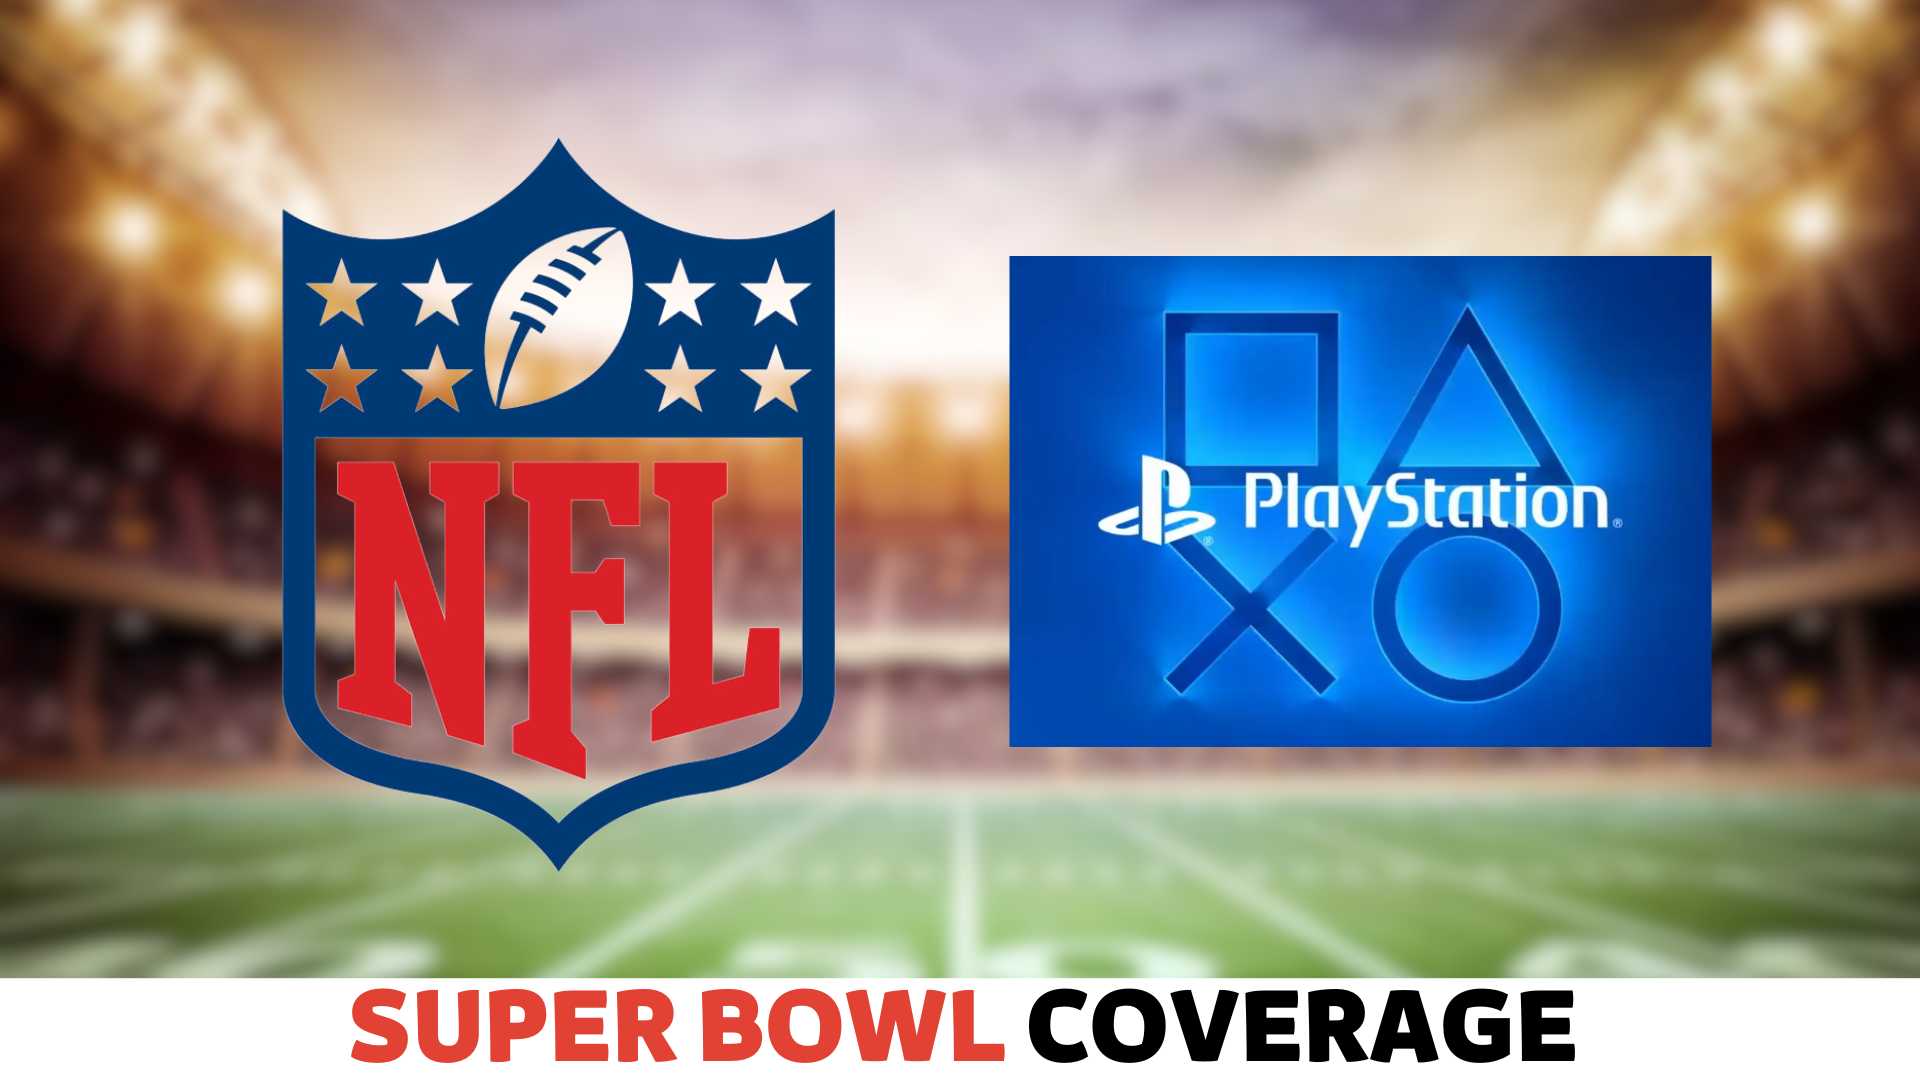 How to Watch NFL Games on PlayStation